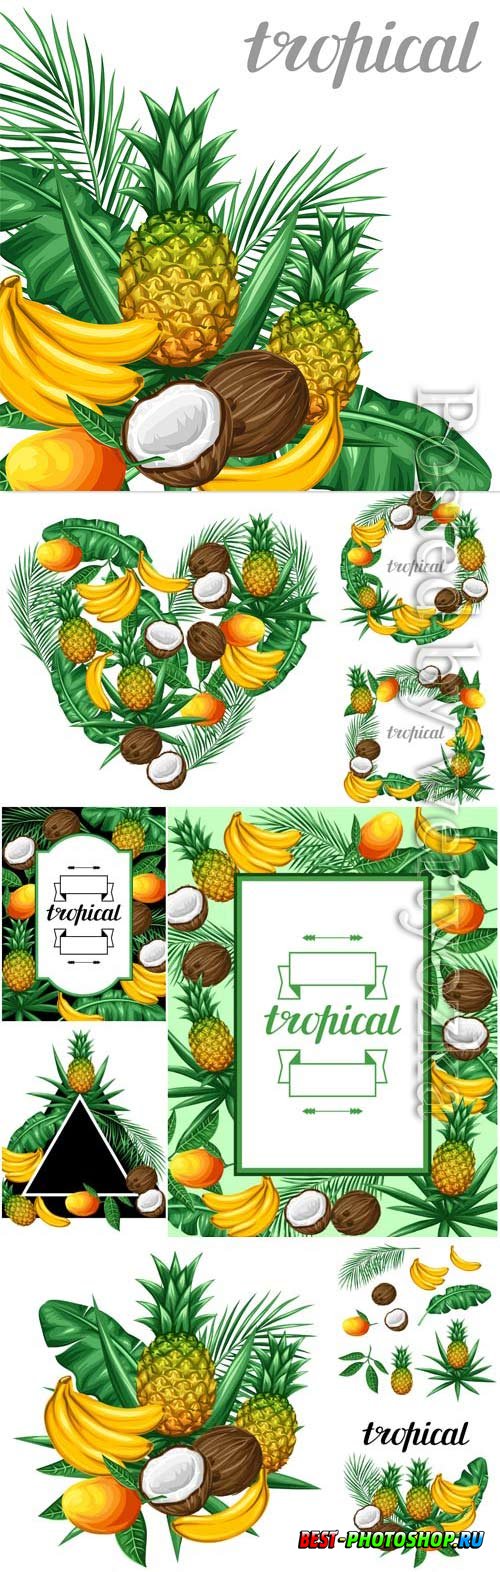 Tropical fruits in vector